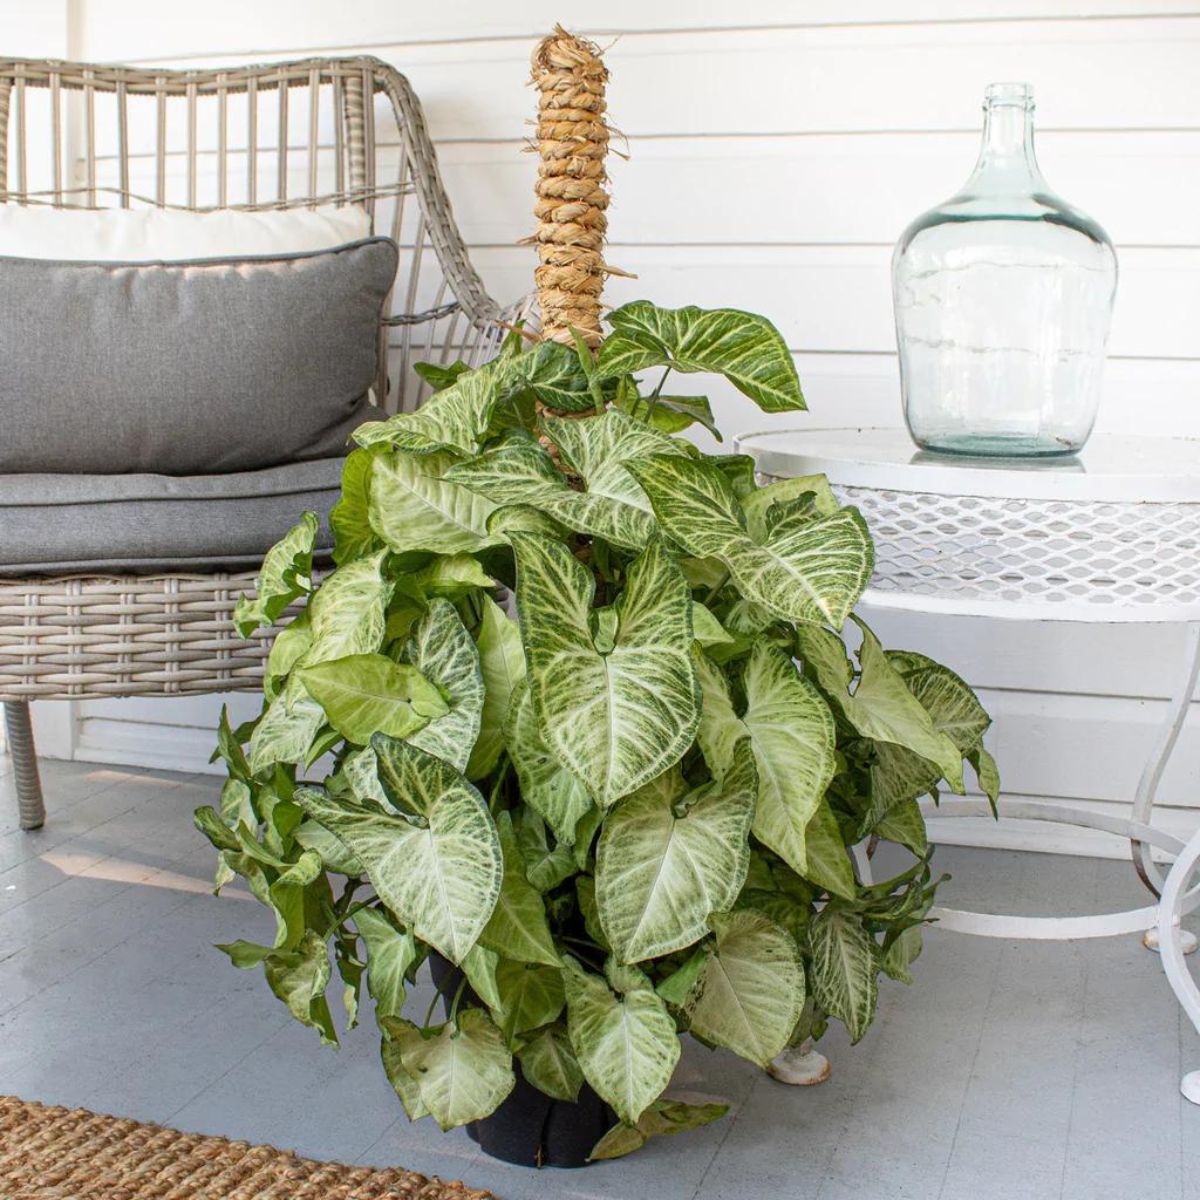 Arrowhead plant is a great indoor houseplant